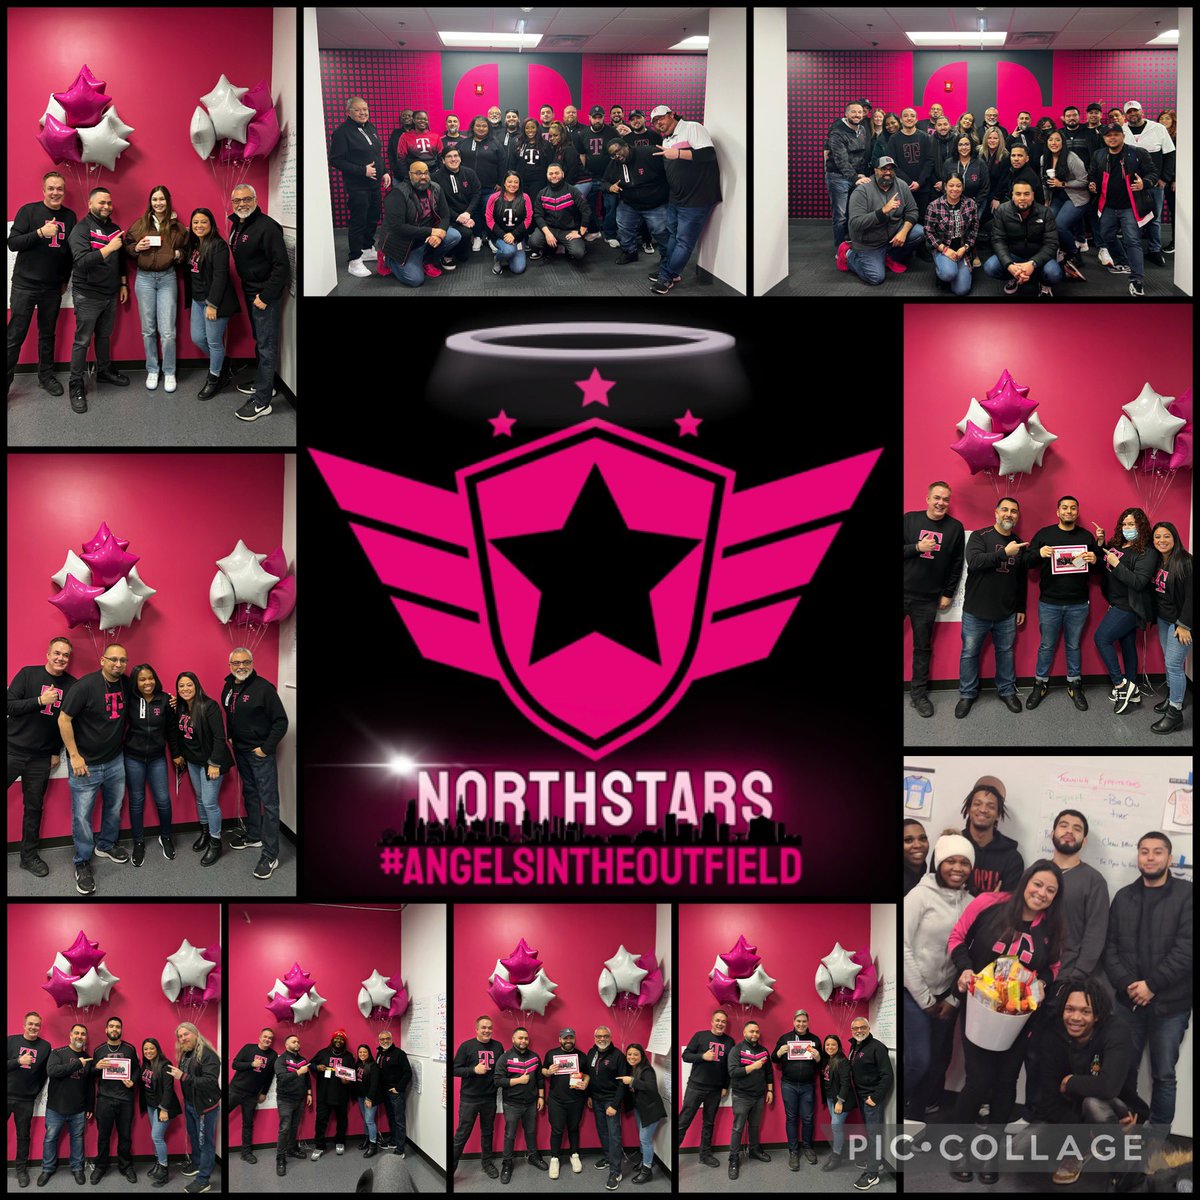 What a week of Leading & Inspiring across the Magenta Northstars from graduation day for new hires to QCR’s with our RSM / RAM leaders🤩! Proud of the accomplishments in Q4 with people first focus, processes in ops & management, & performance 🎉 #WinTogether @domjrcoleman